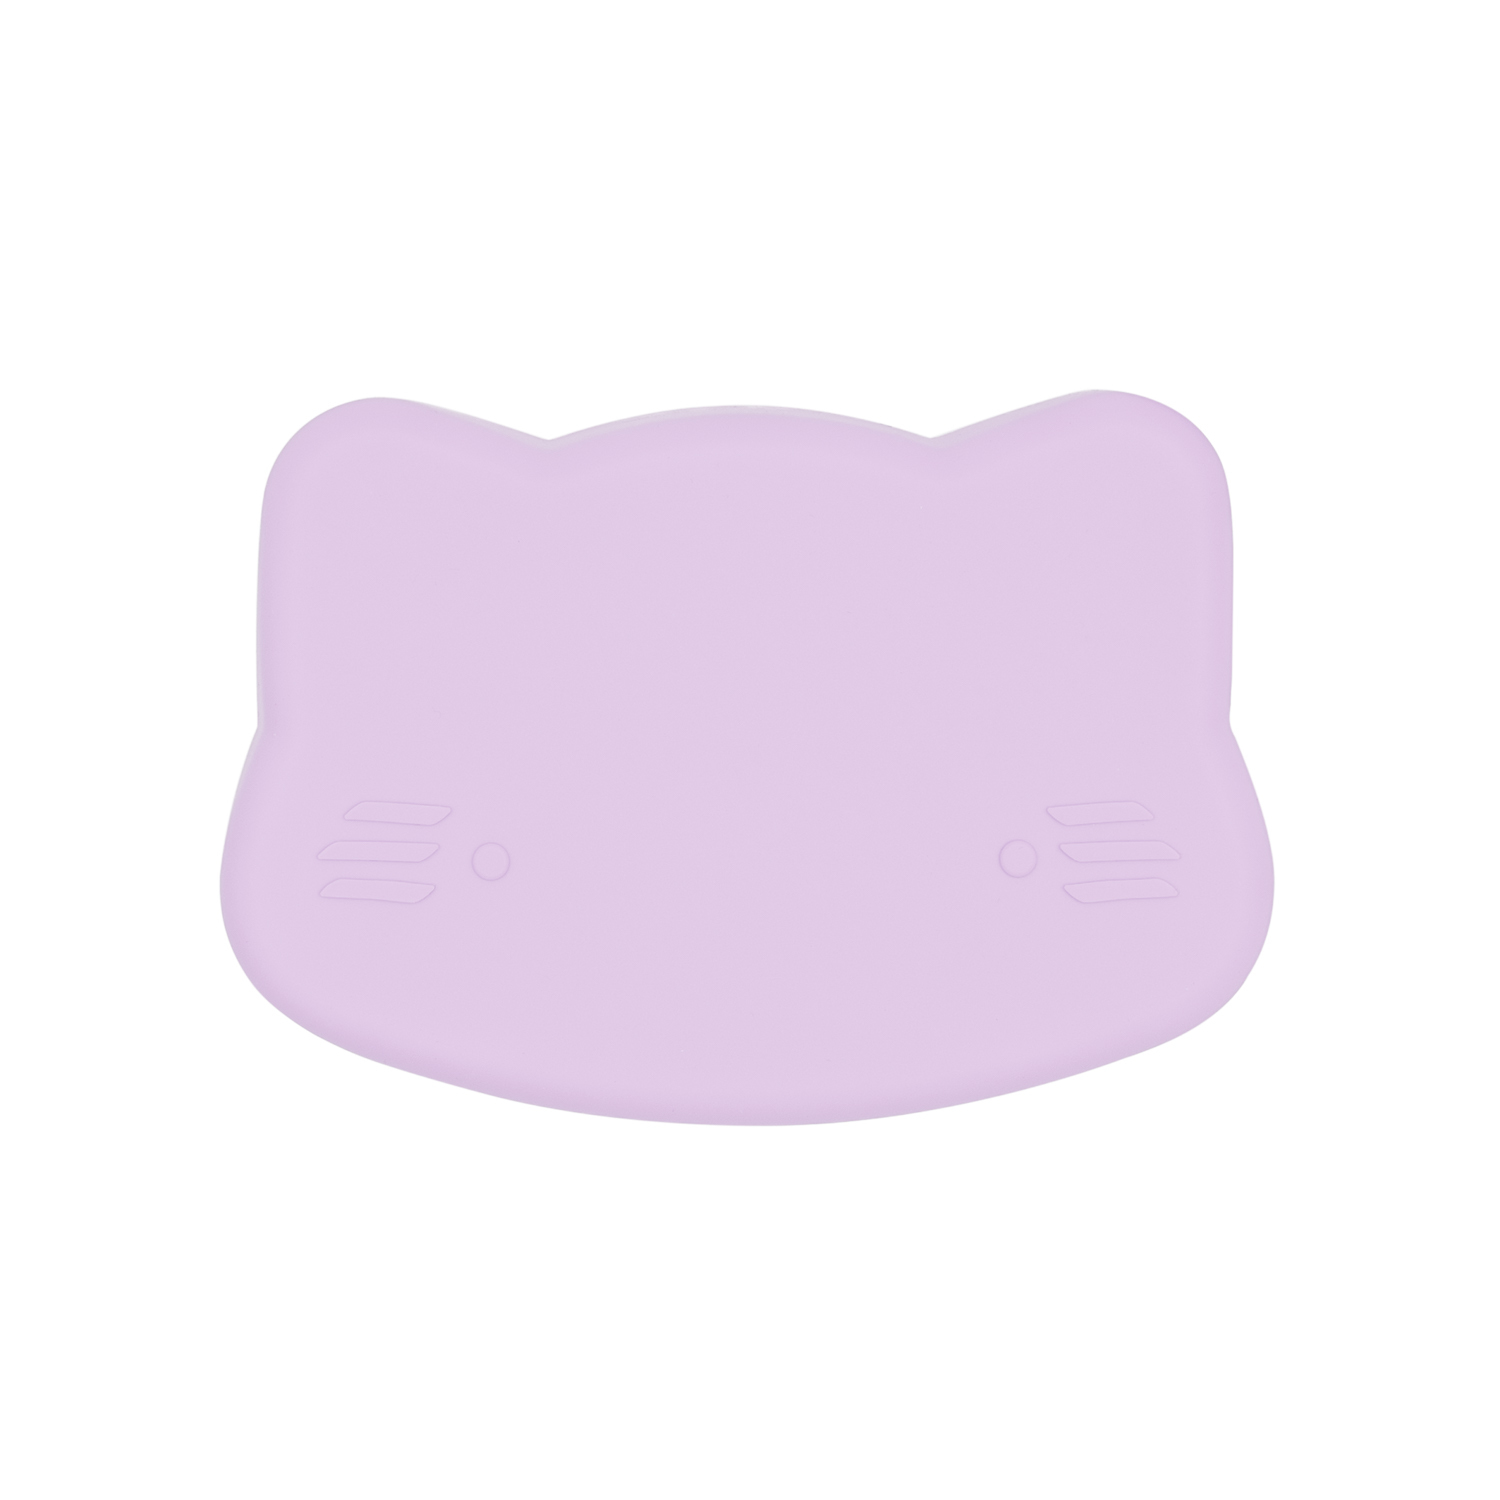 Cat snackie closed - Lilac (low).JPG